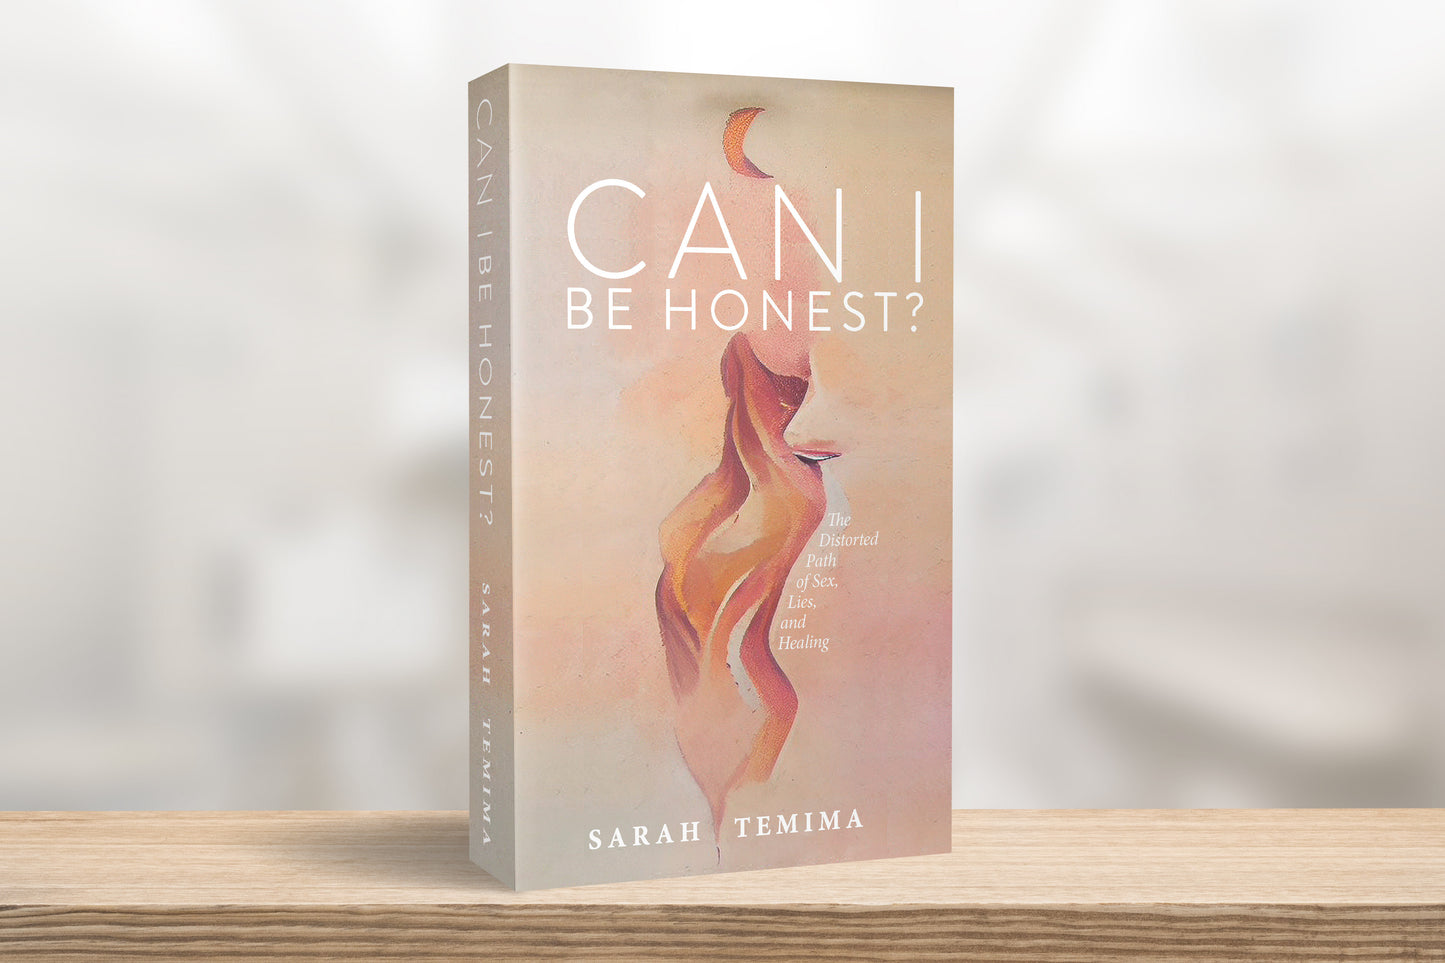 PRE-ORDER Signed Copy of “Can I Be Honest?” The distorted path of sex, lies, and healing